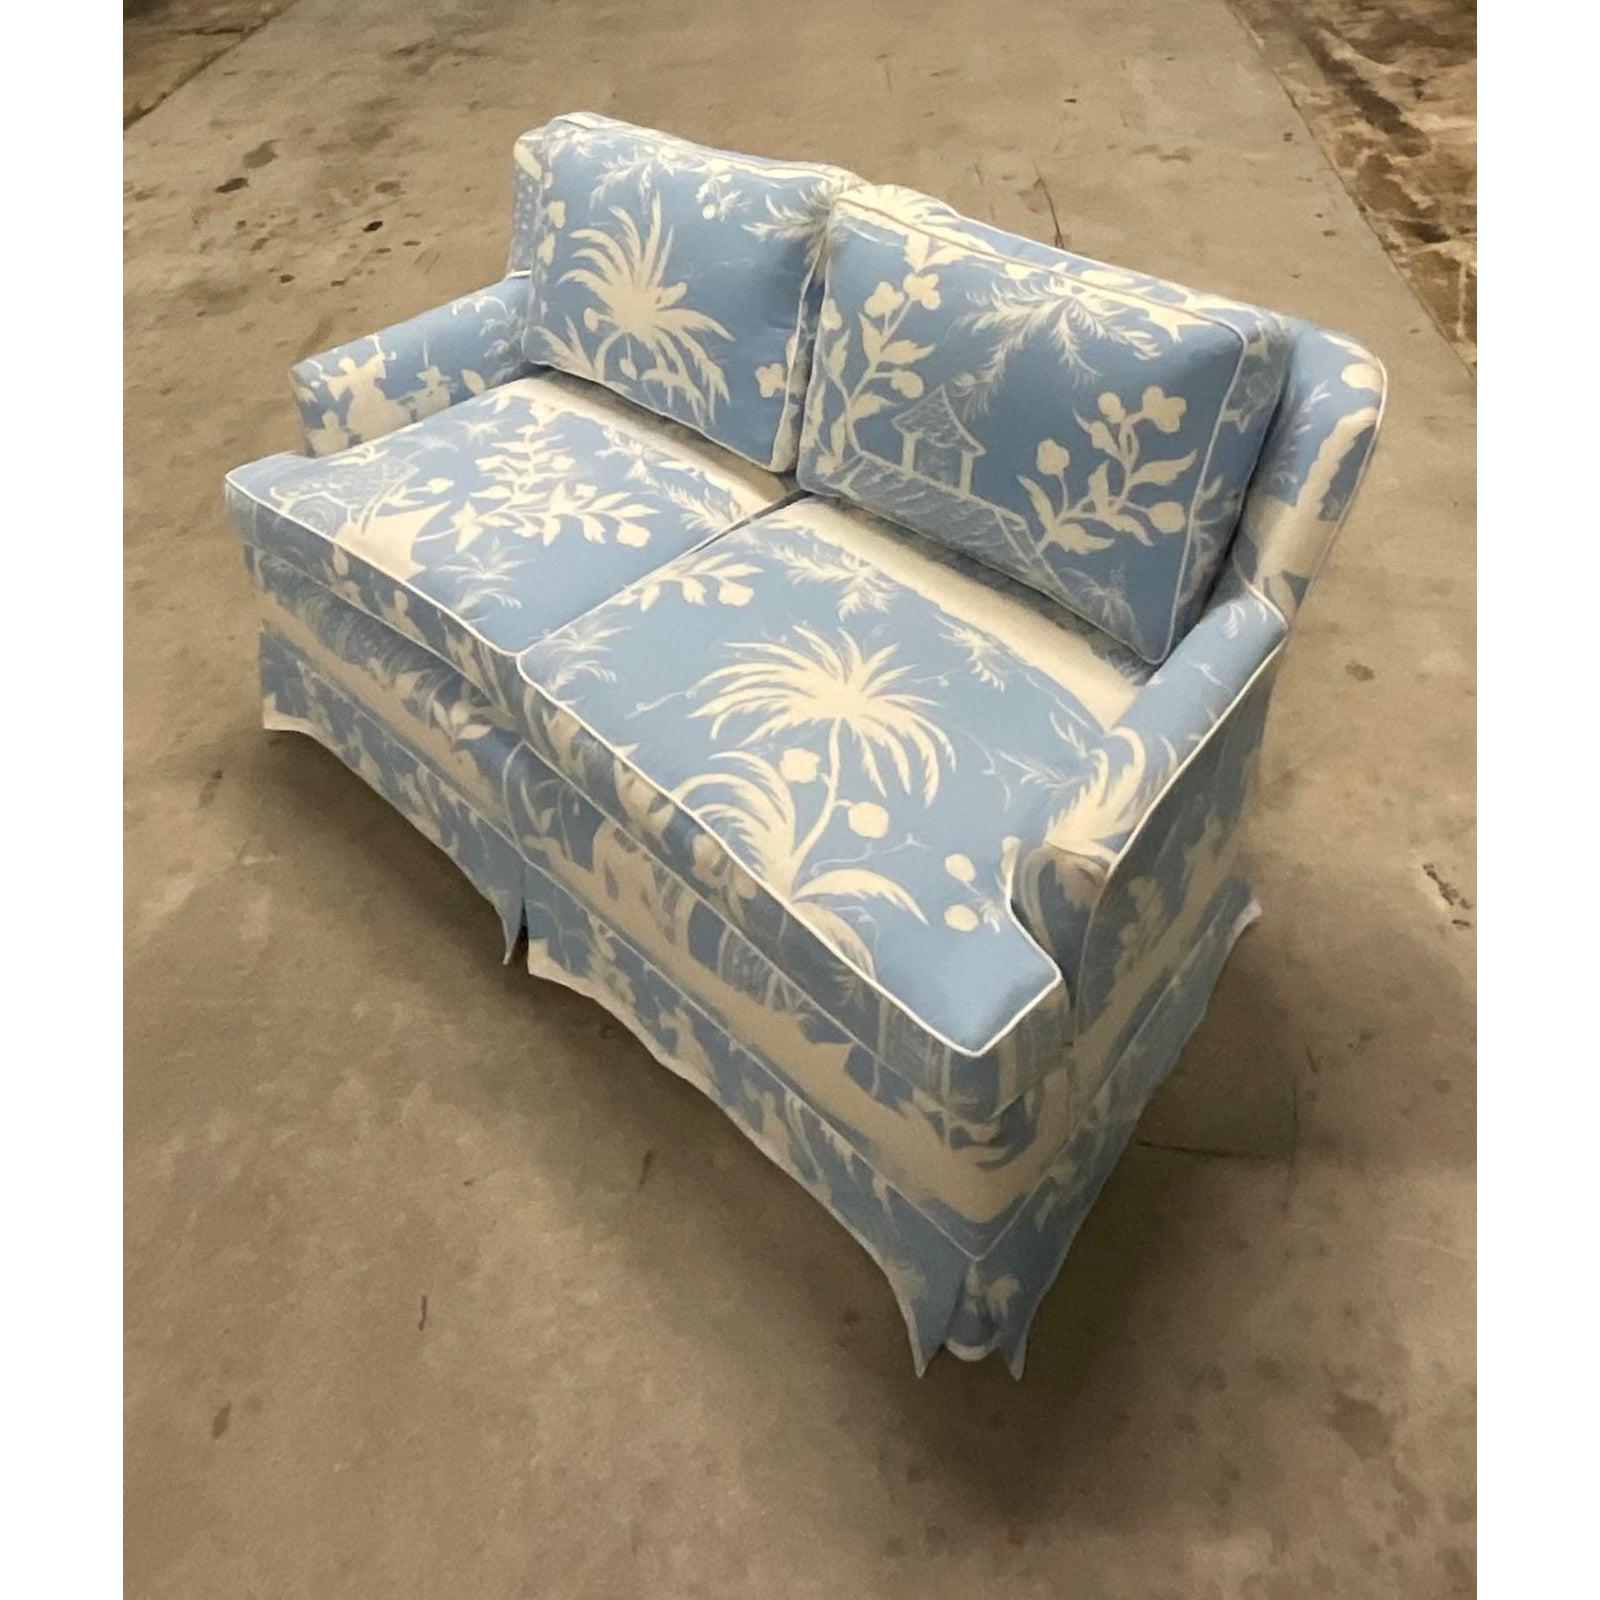 North American Vintage Chinoiserie Loveseat With Custom Lavender Quadrille “China Seas” Print